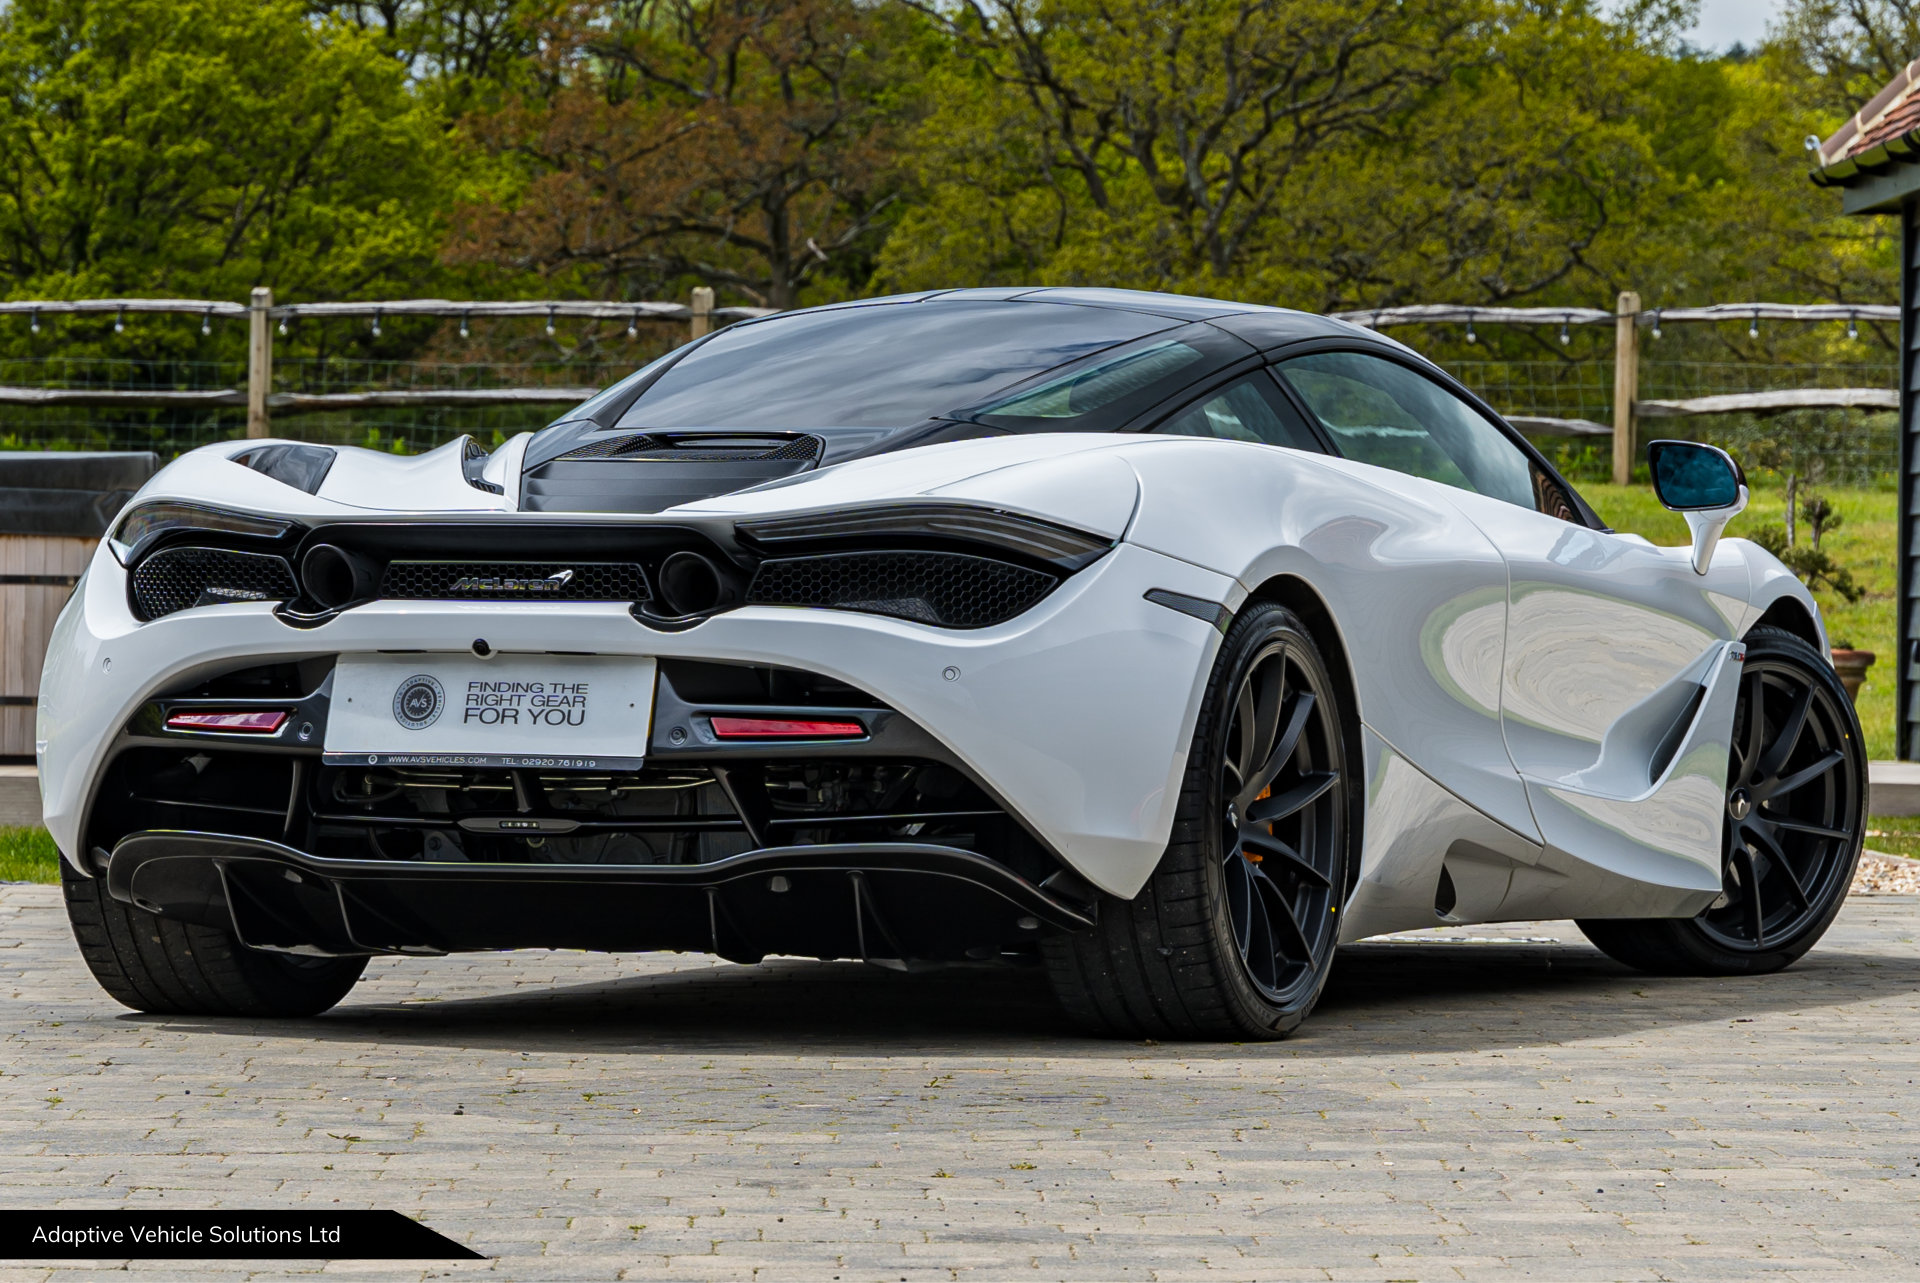 2018 18 McLaren 720s Performance Coupe White off side rear